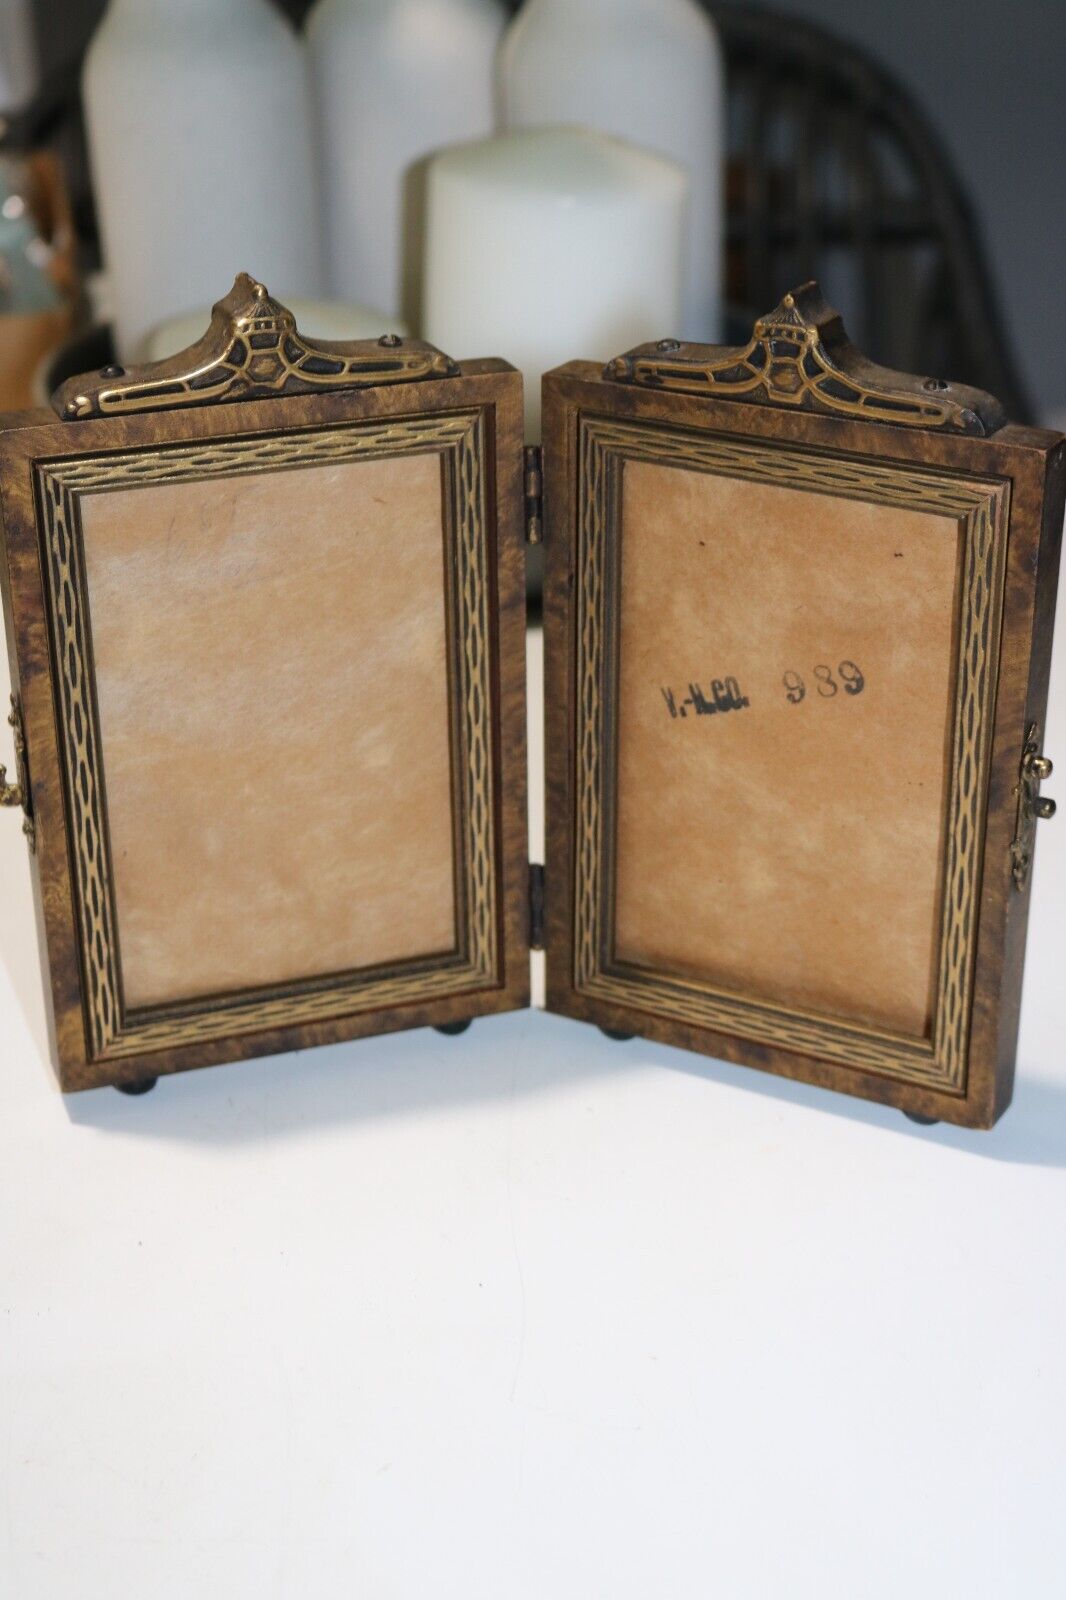 Vintage Double Hinged Picture Frame - Wood with Gold Tone Accents